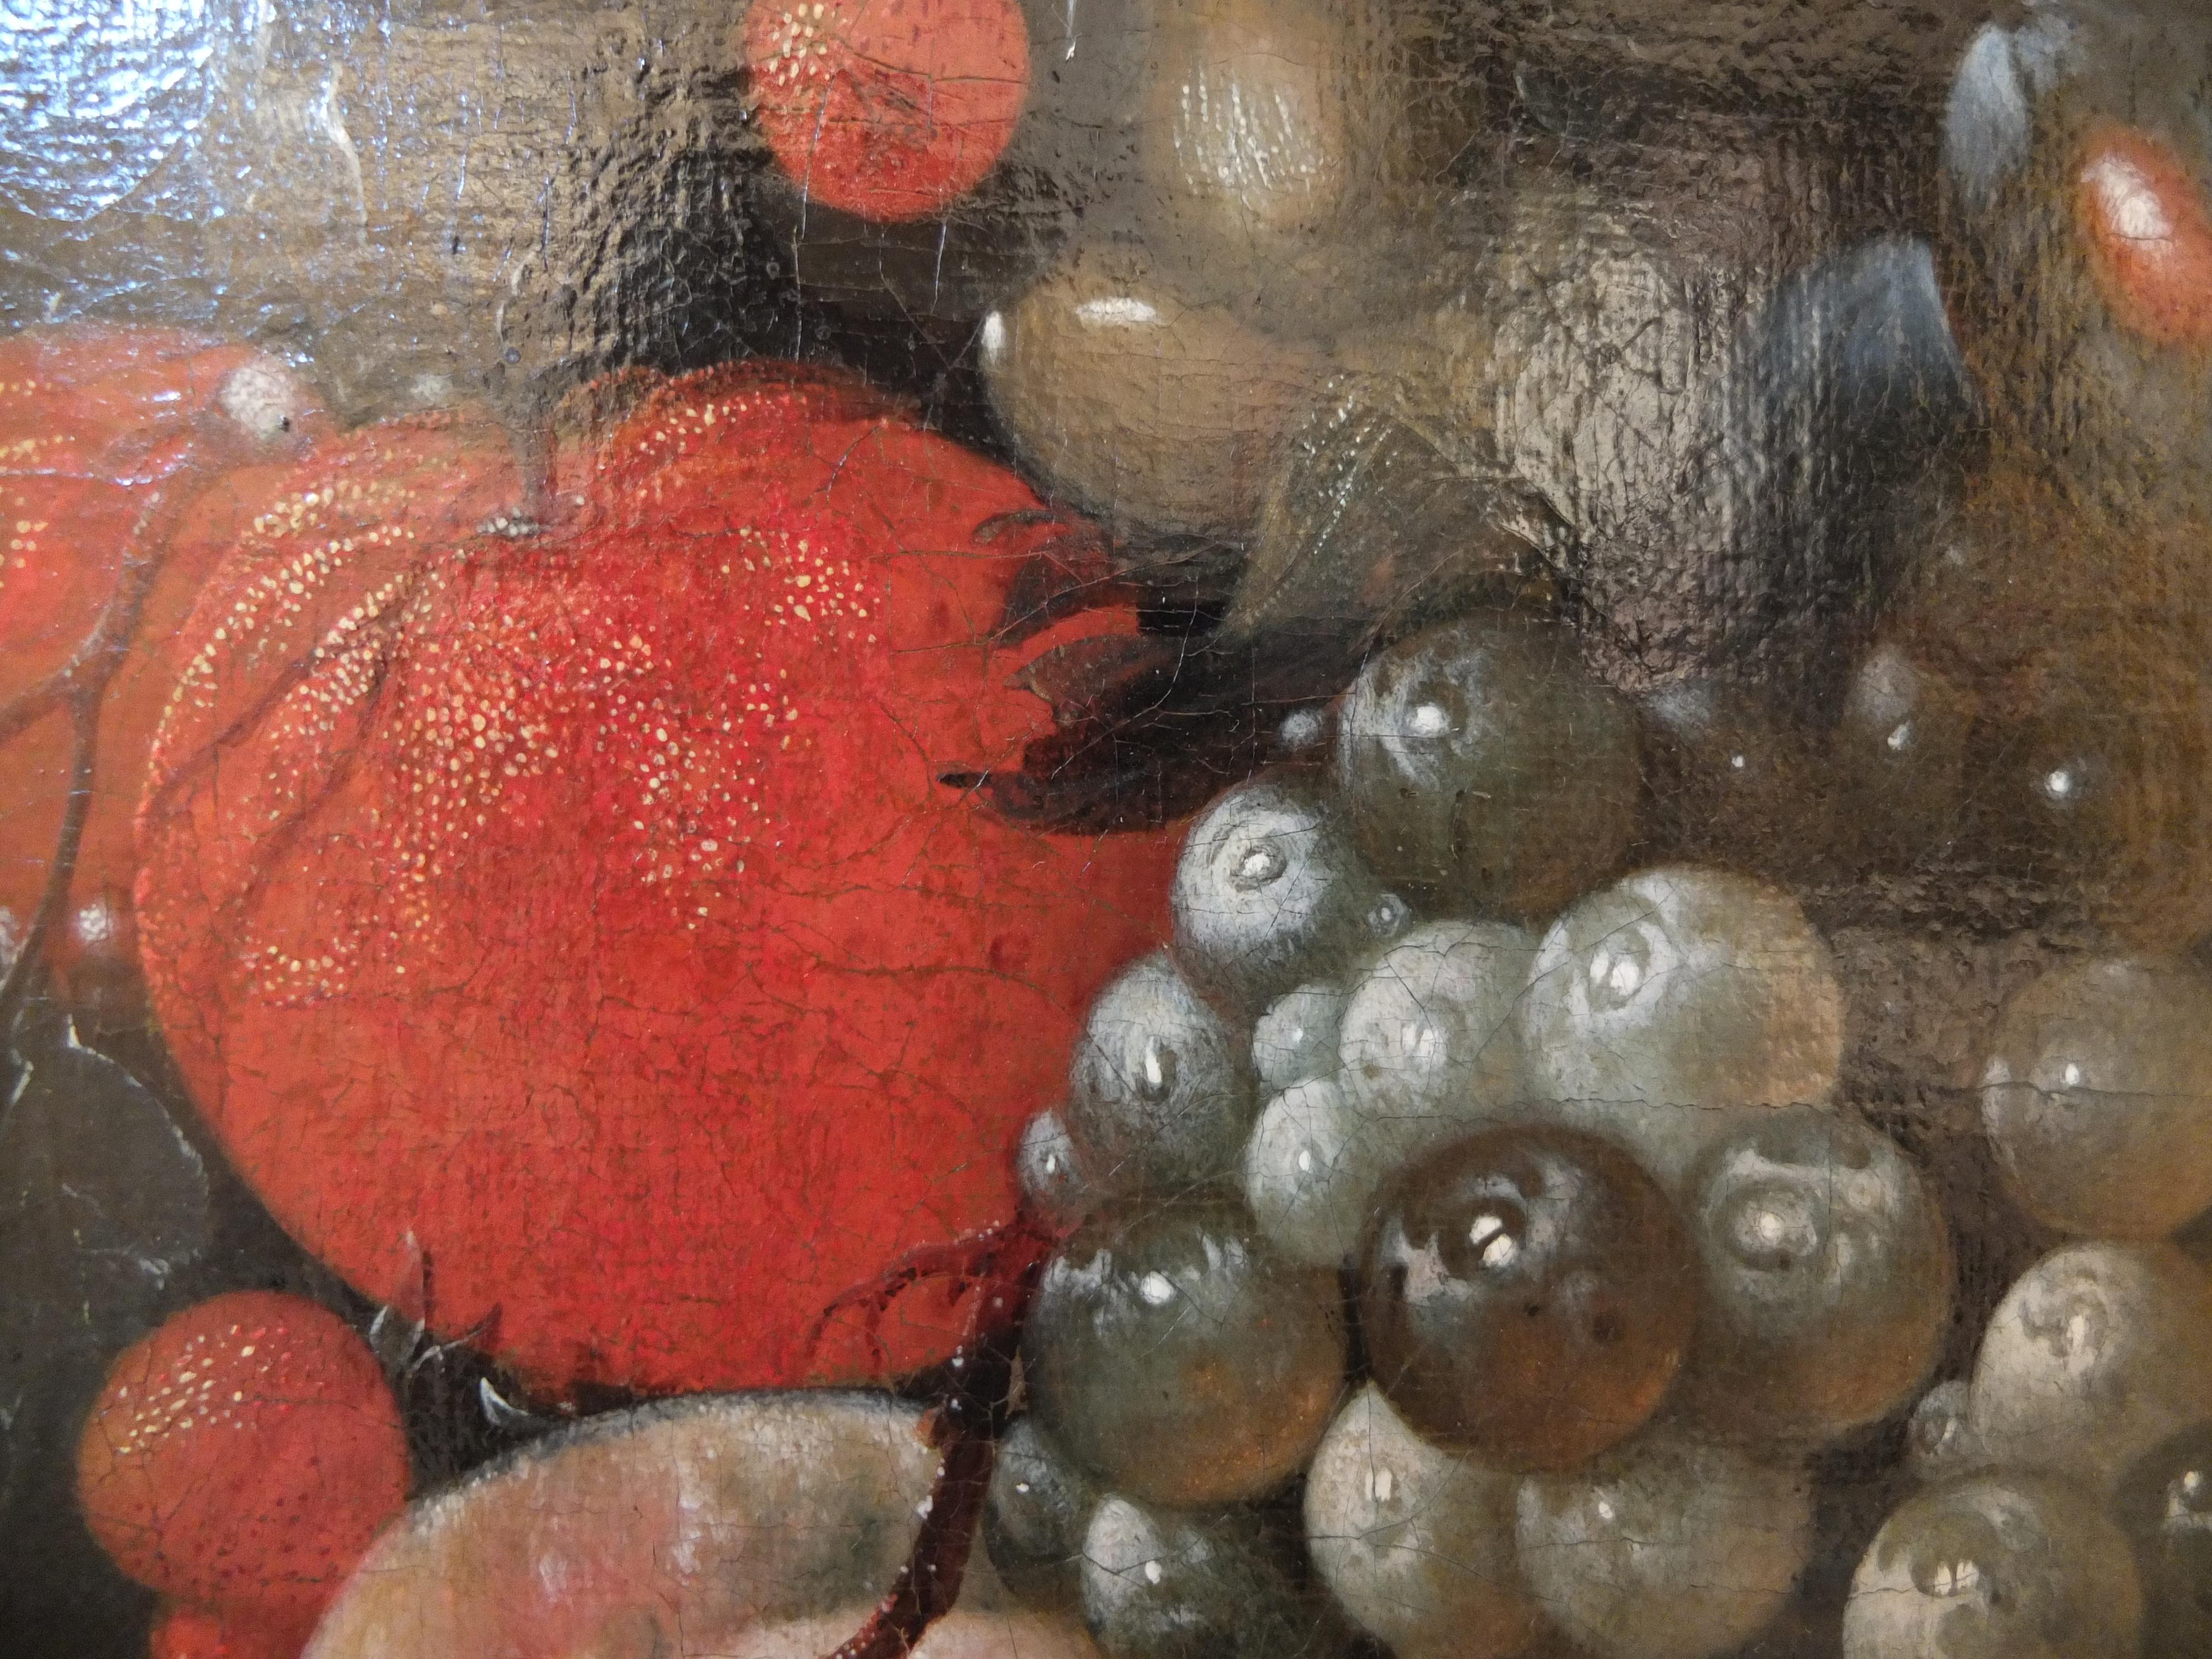 Provenance
Private collection, Germany until 2018
The work has been reviewed by Fred Meijer.

A festoon of fruits is attached to a blue ribbon on an iron nail. This is composed of light grapes, oranges, peaches, cherries, red berries, plums and